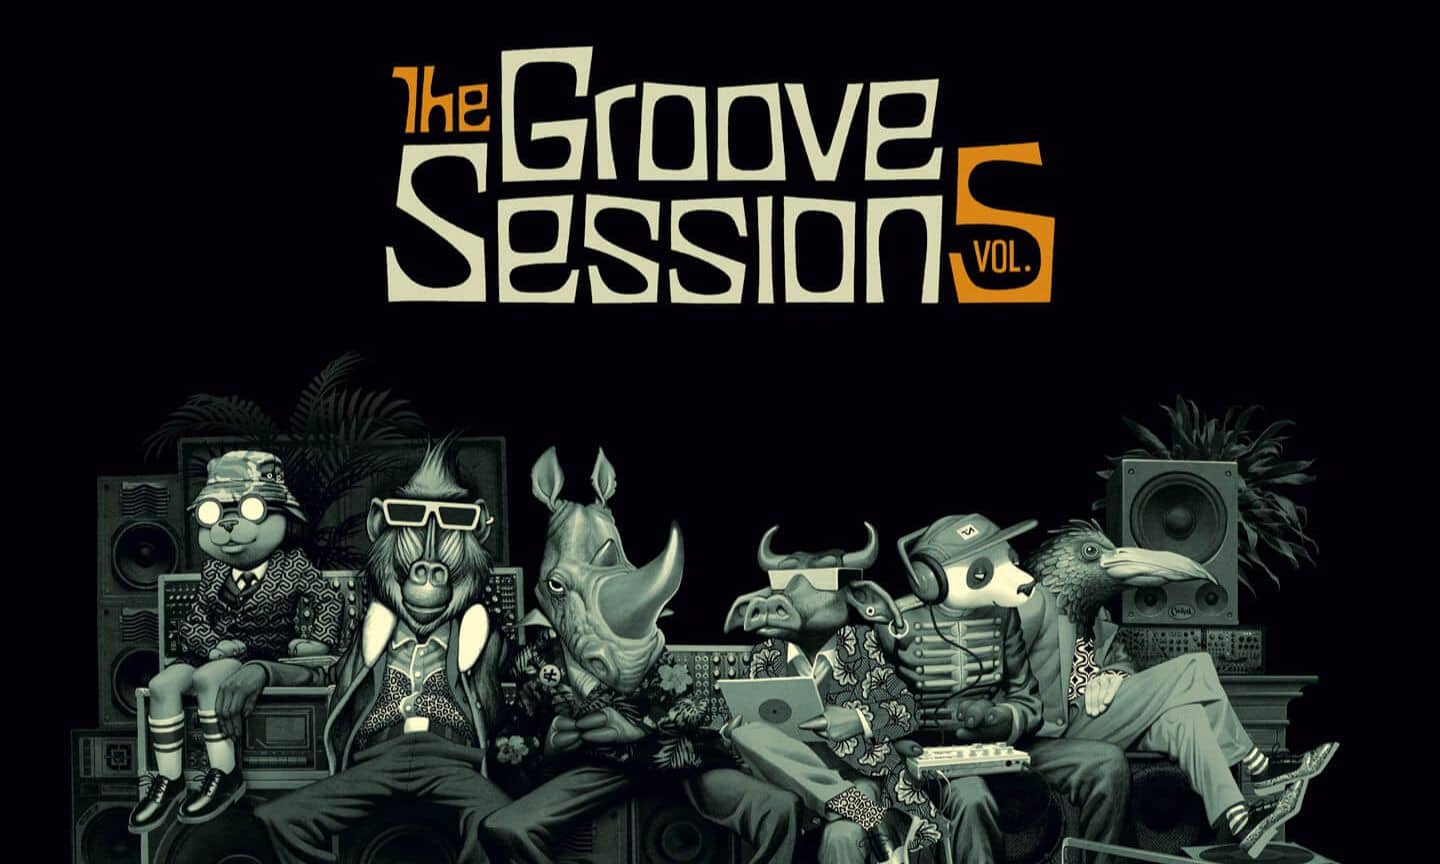 Groove Sessions Vol.5 